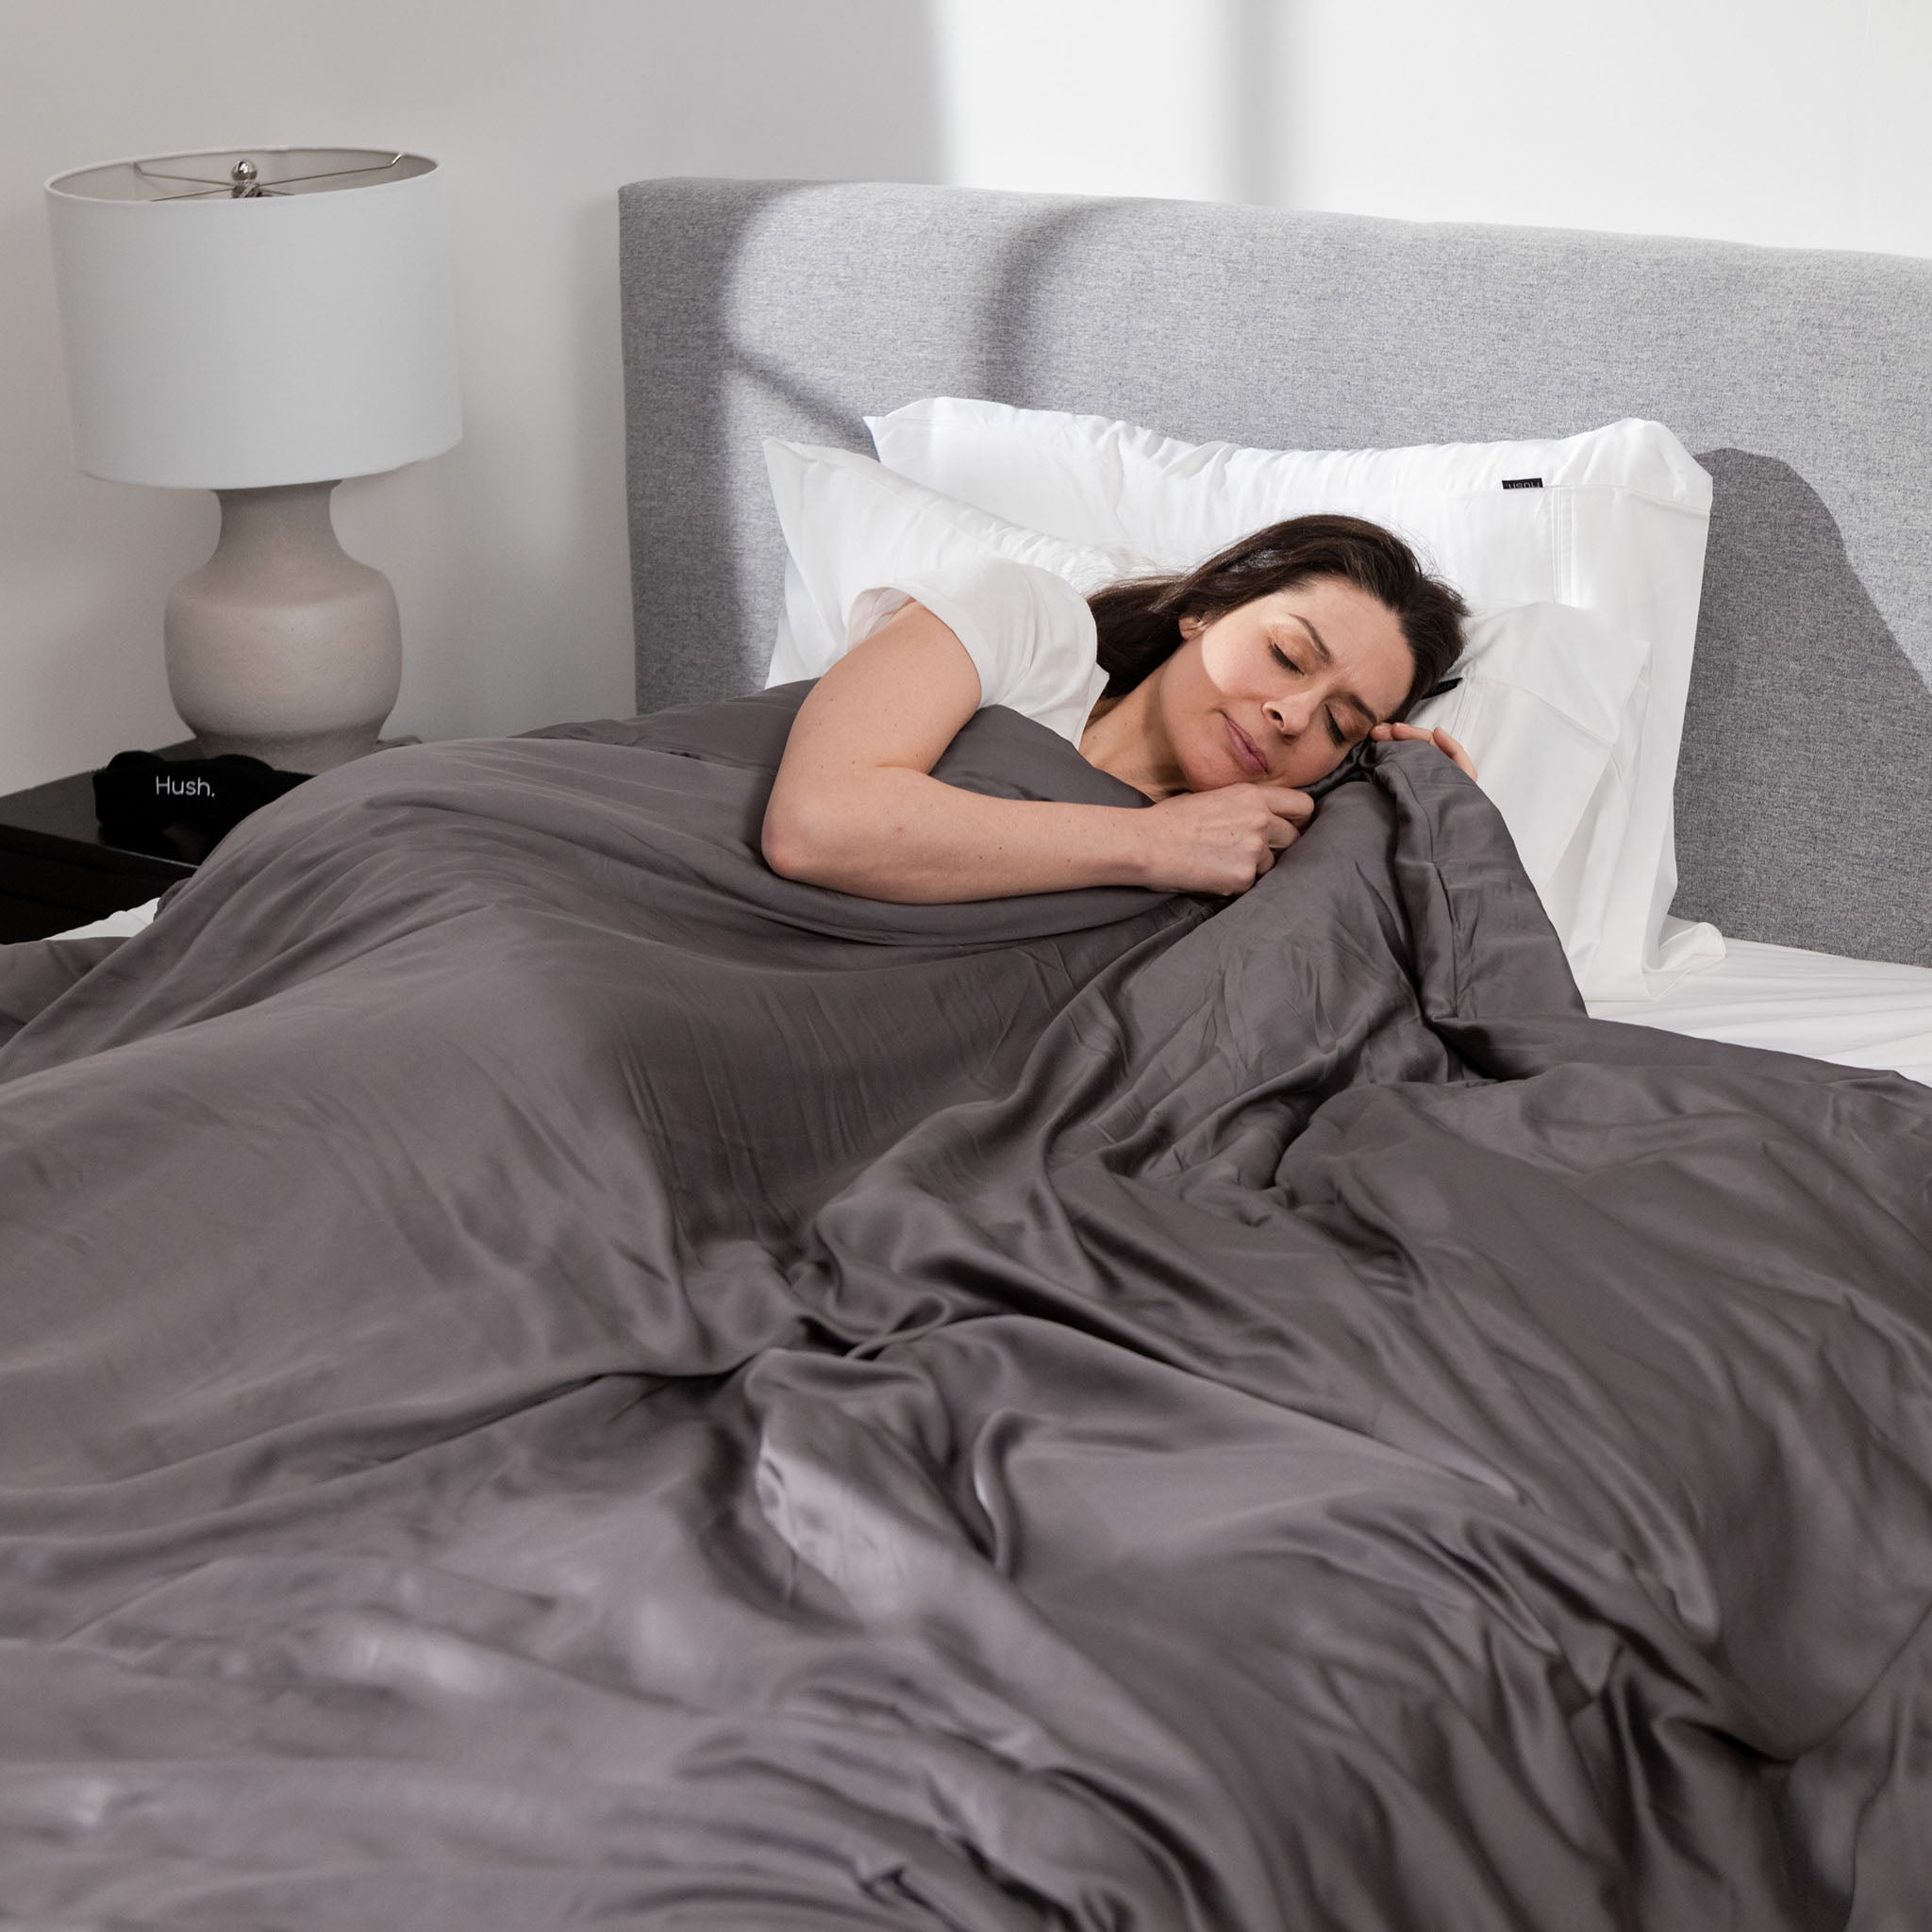 Hush Iced 2.0 The Original Cooling Weighted Blanket